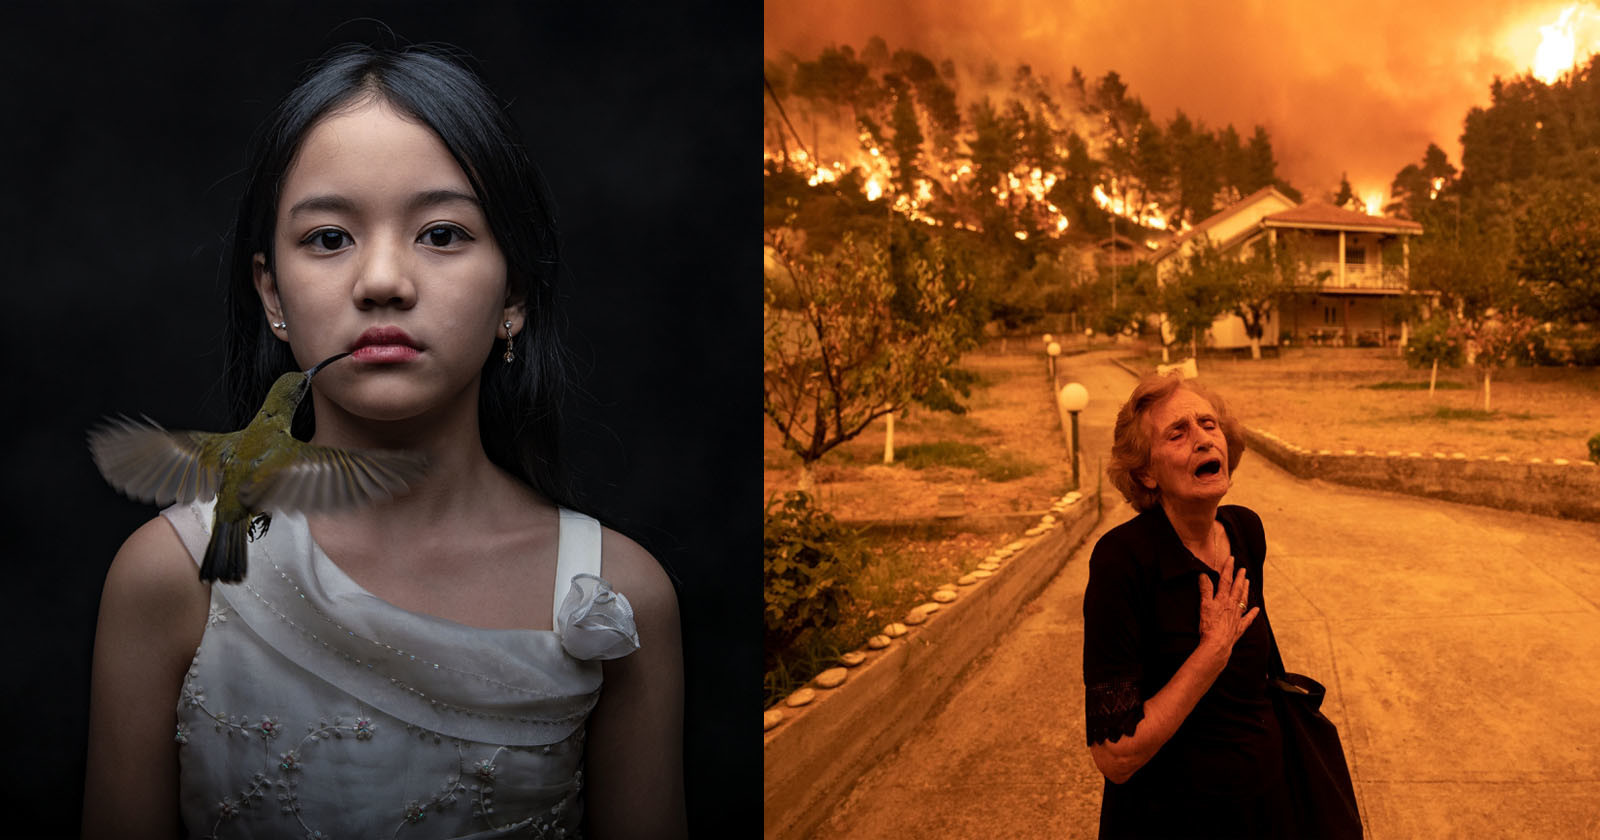 The Incredible Winners of the 2022 Siena International Photo Awards